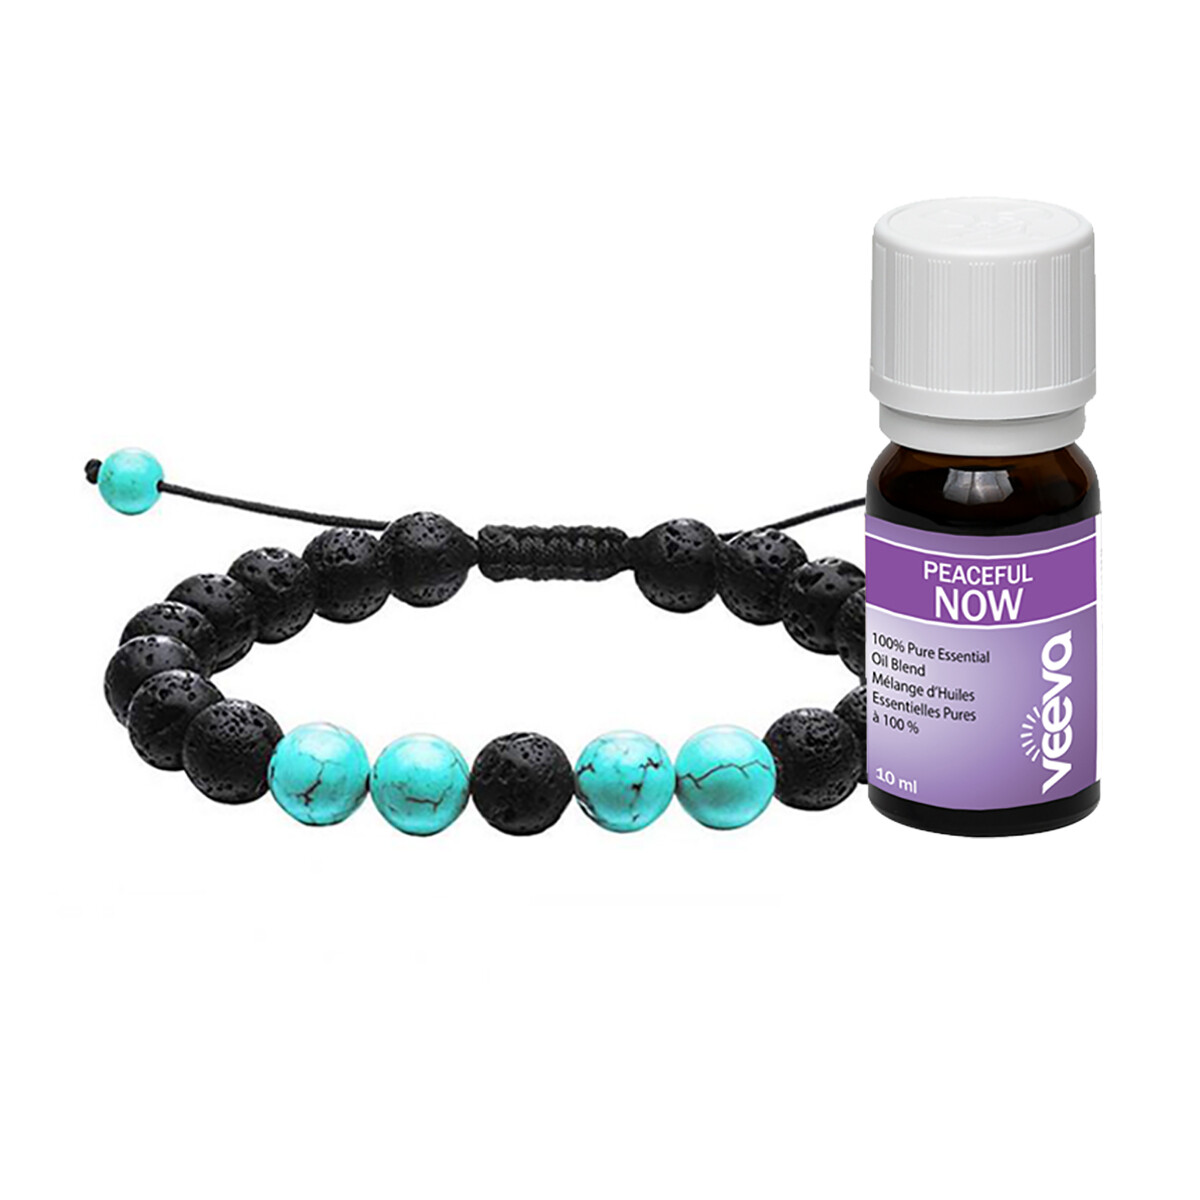 Personal Aromatherapy Lava Stone Bracelet with Peaceful NOW Essential Oil Blend (4 models)